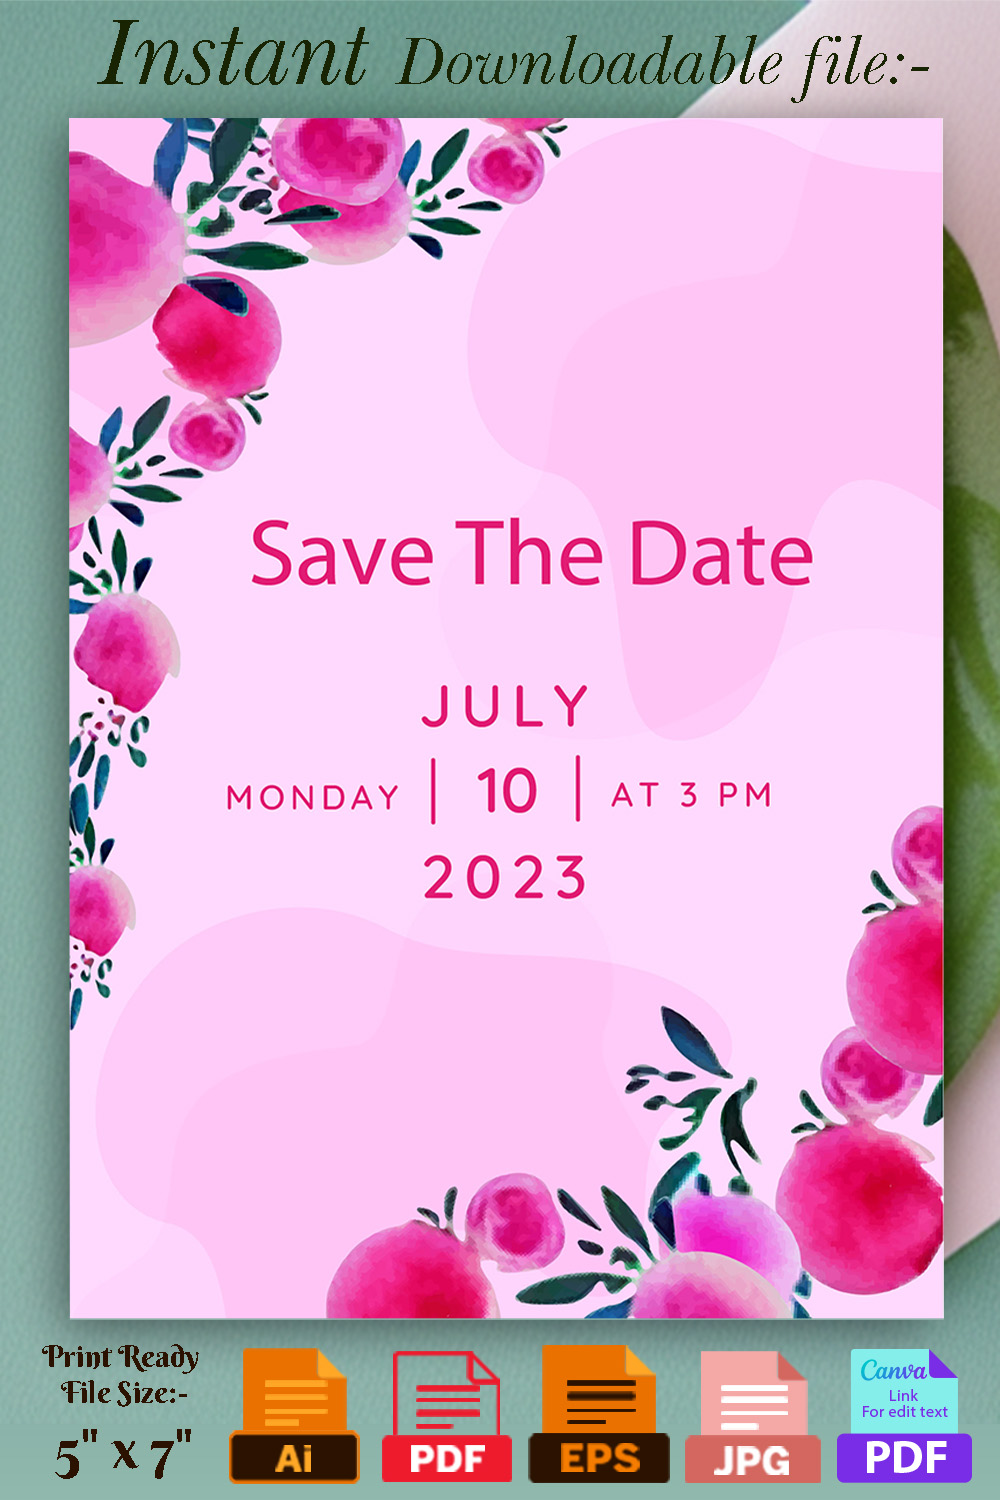 Image with irresistible wedding invitation card with pink color flowers.